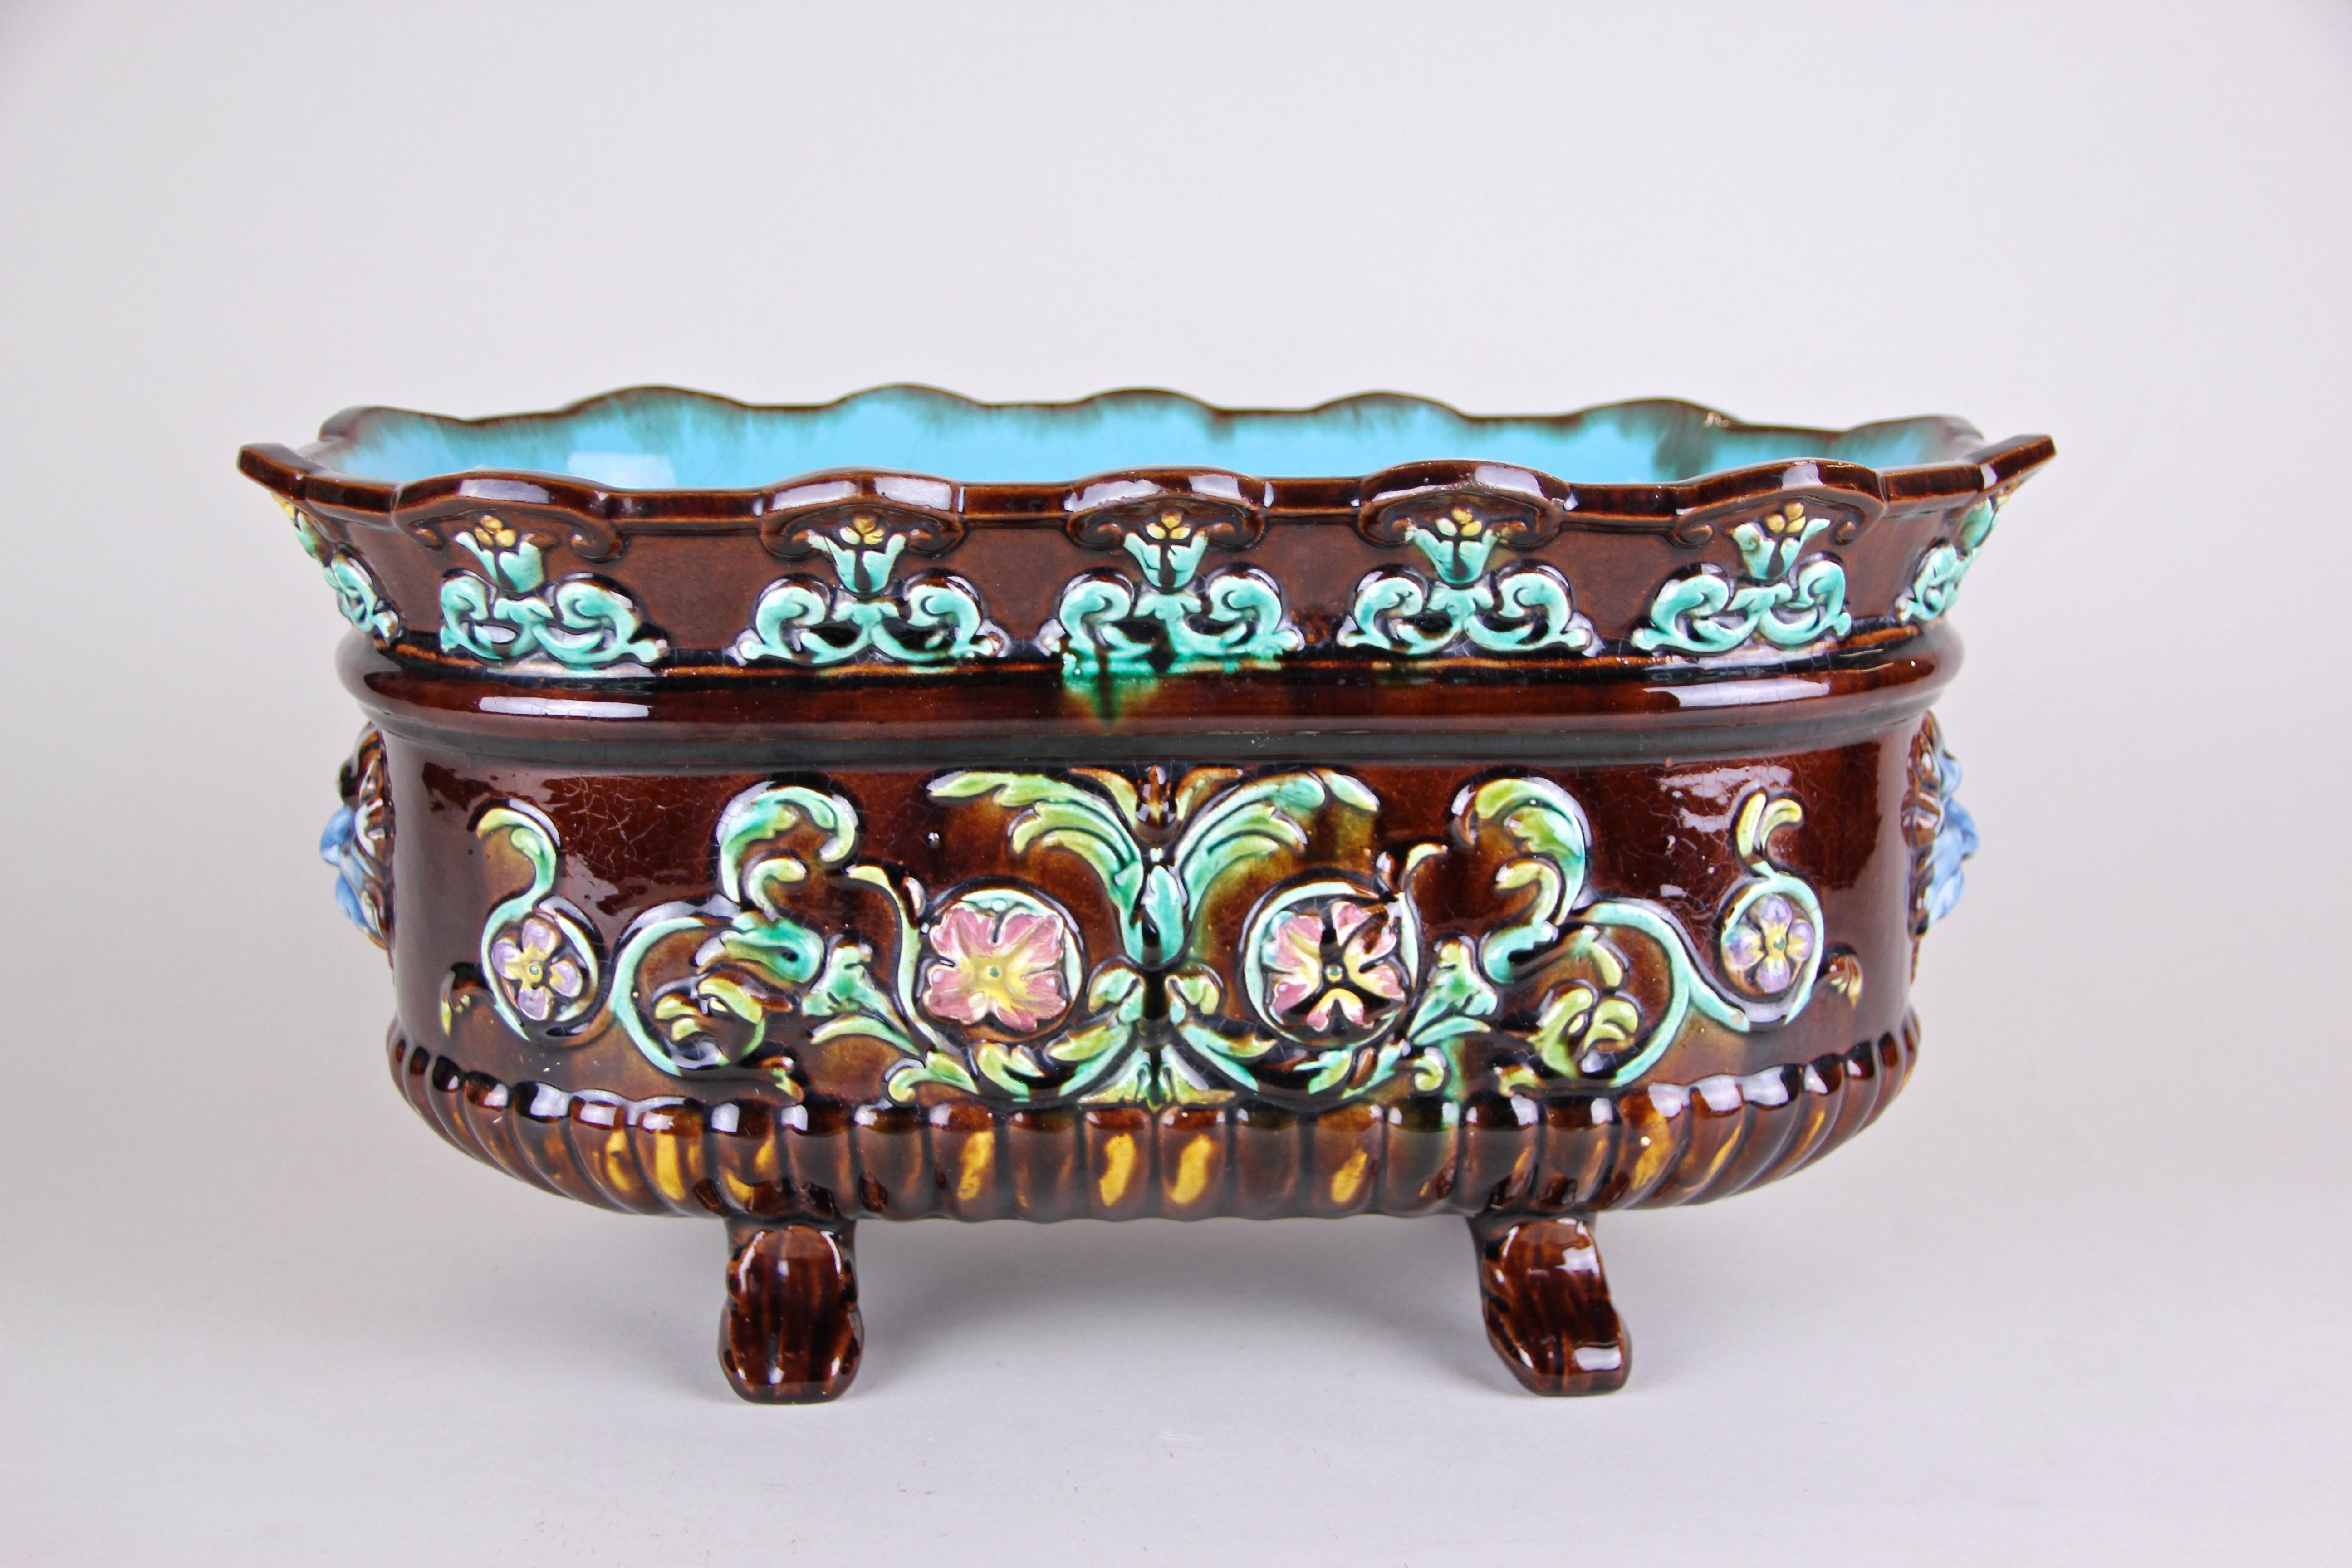 Exceptional colorful Majolica jardinière or cachepot from Art Nouveau period around 1915 in France. An unusual shape, delicate floral design elements and a beautiful coloration in brown, green, red and blue tones combined makes this piece of french